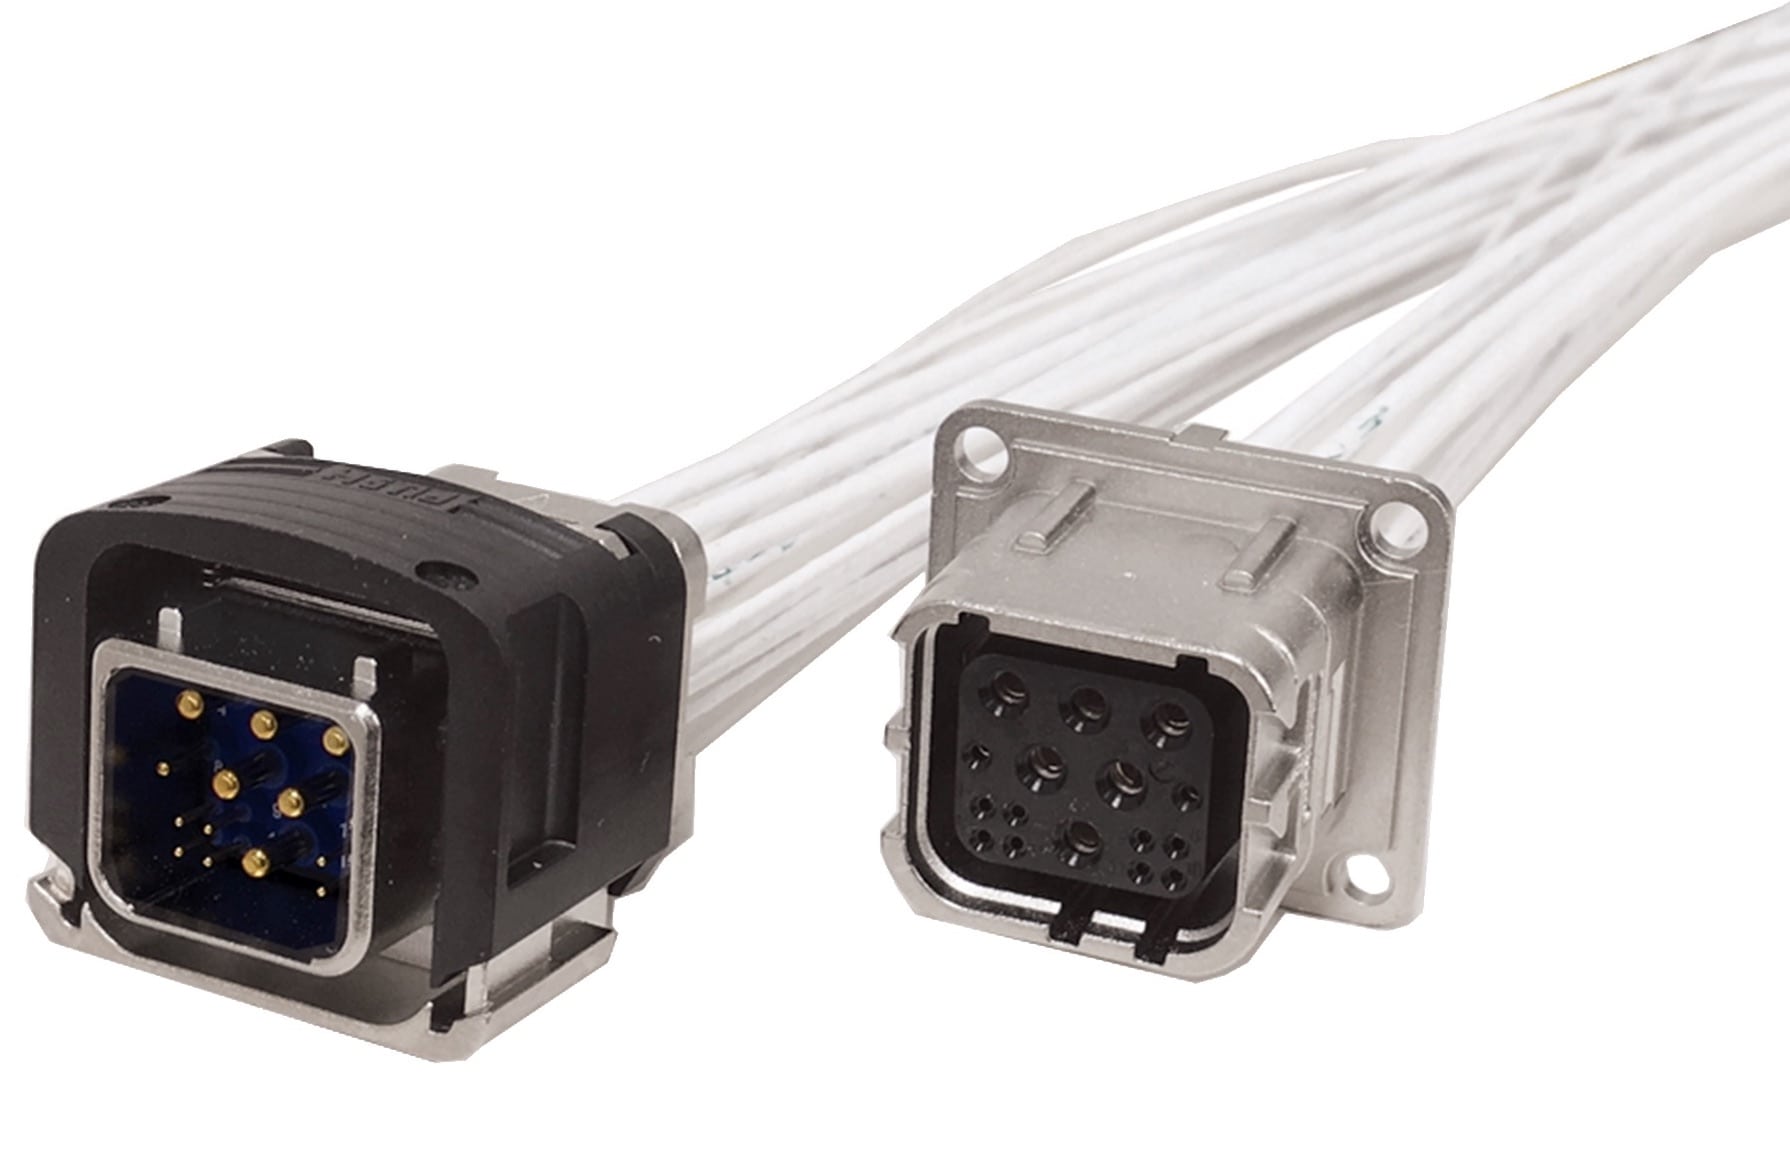 Cinch Connectivity Solutions’ new durable, modular, and exchangeable C-DMX™ connectors